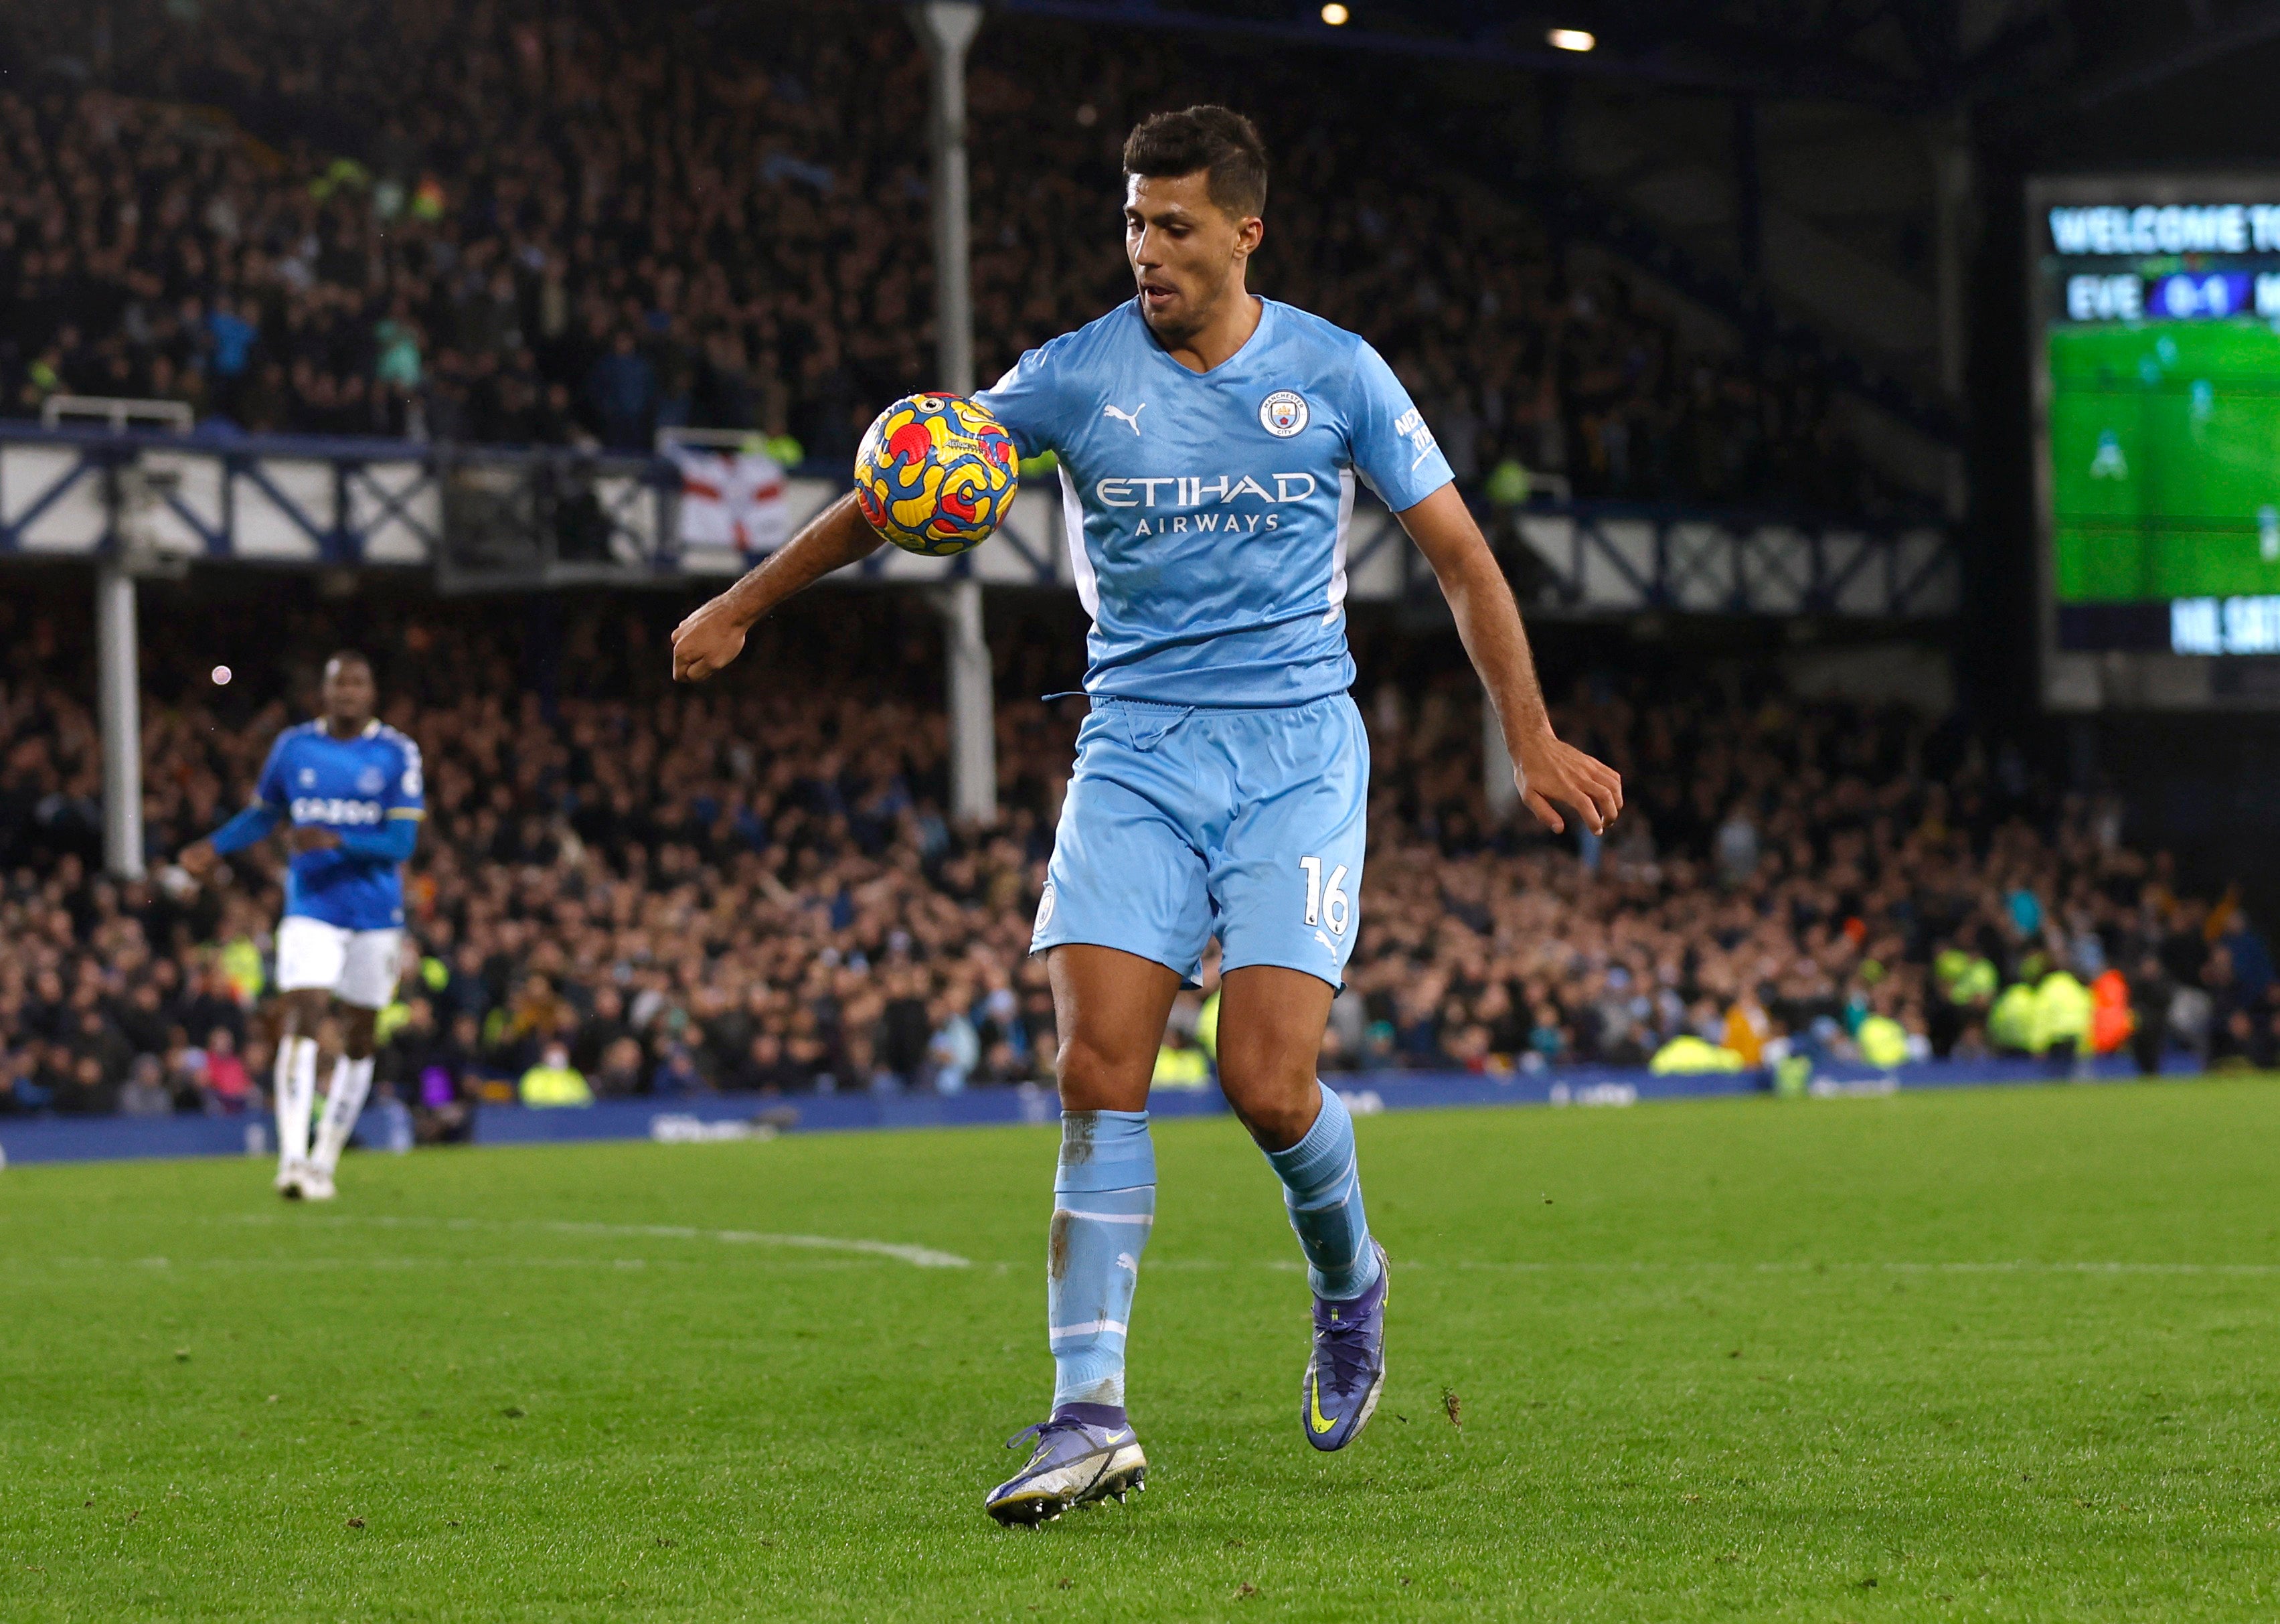 Manchester City midfielder Rodri appeared to handle the ball in the box